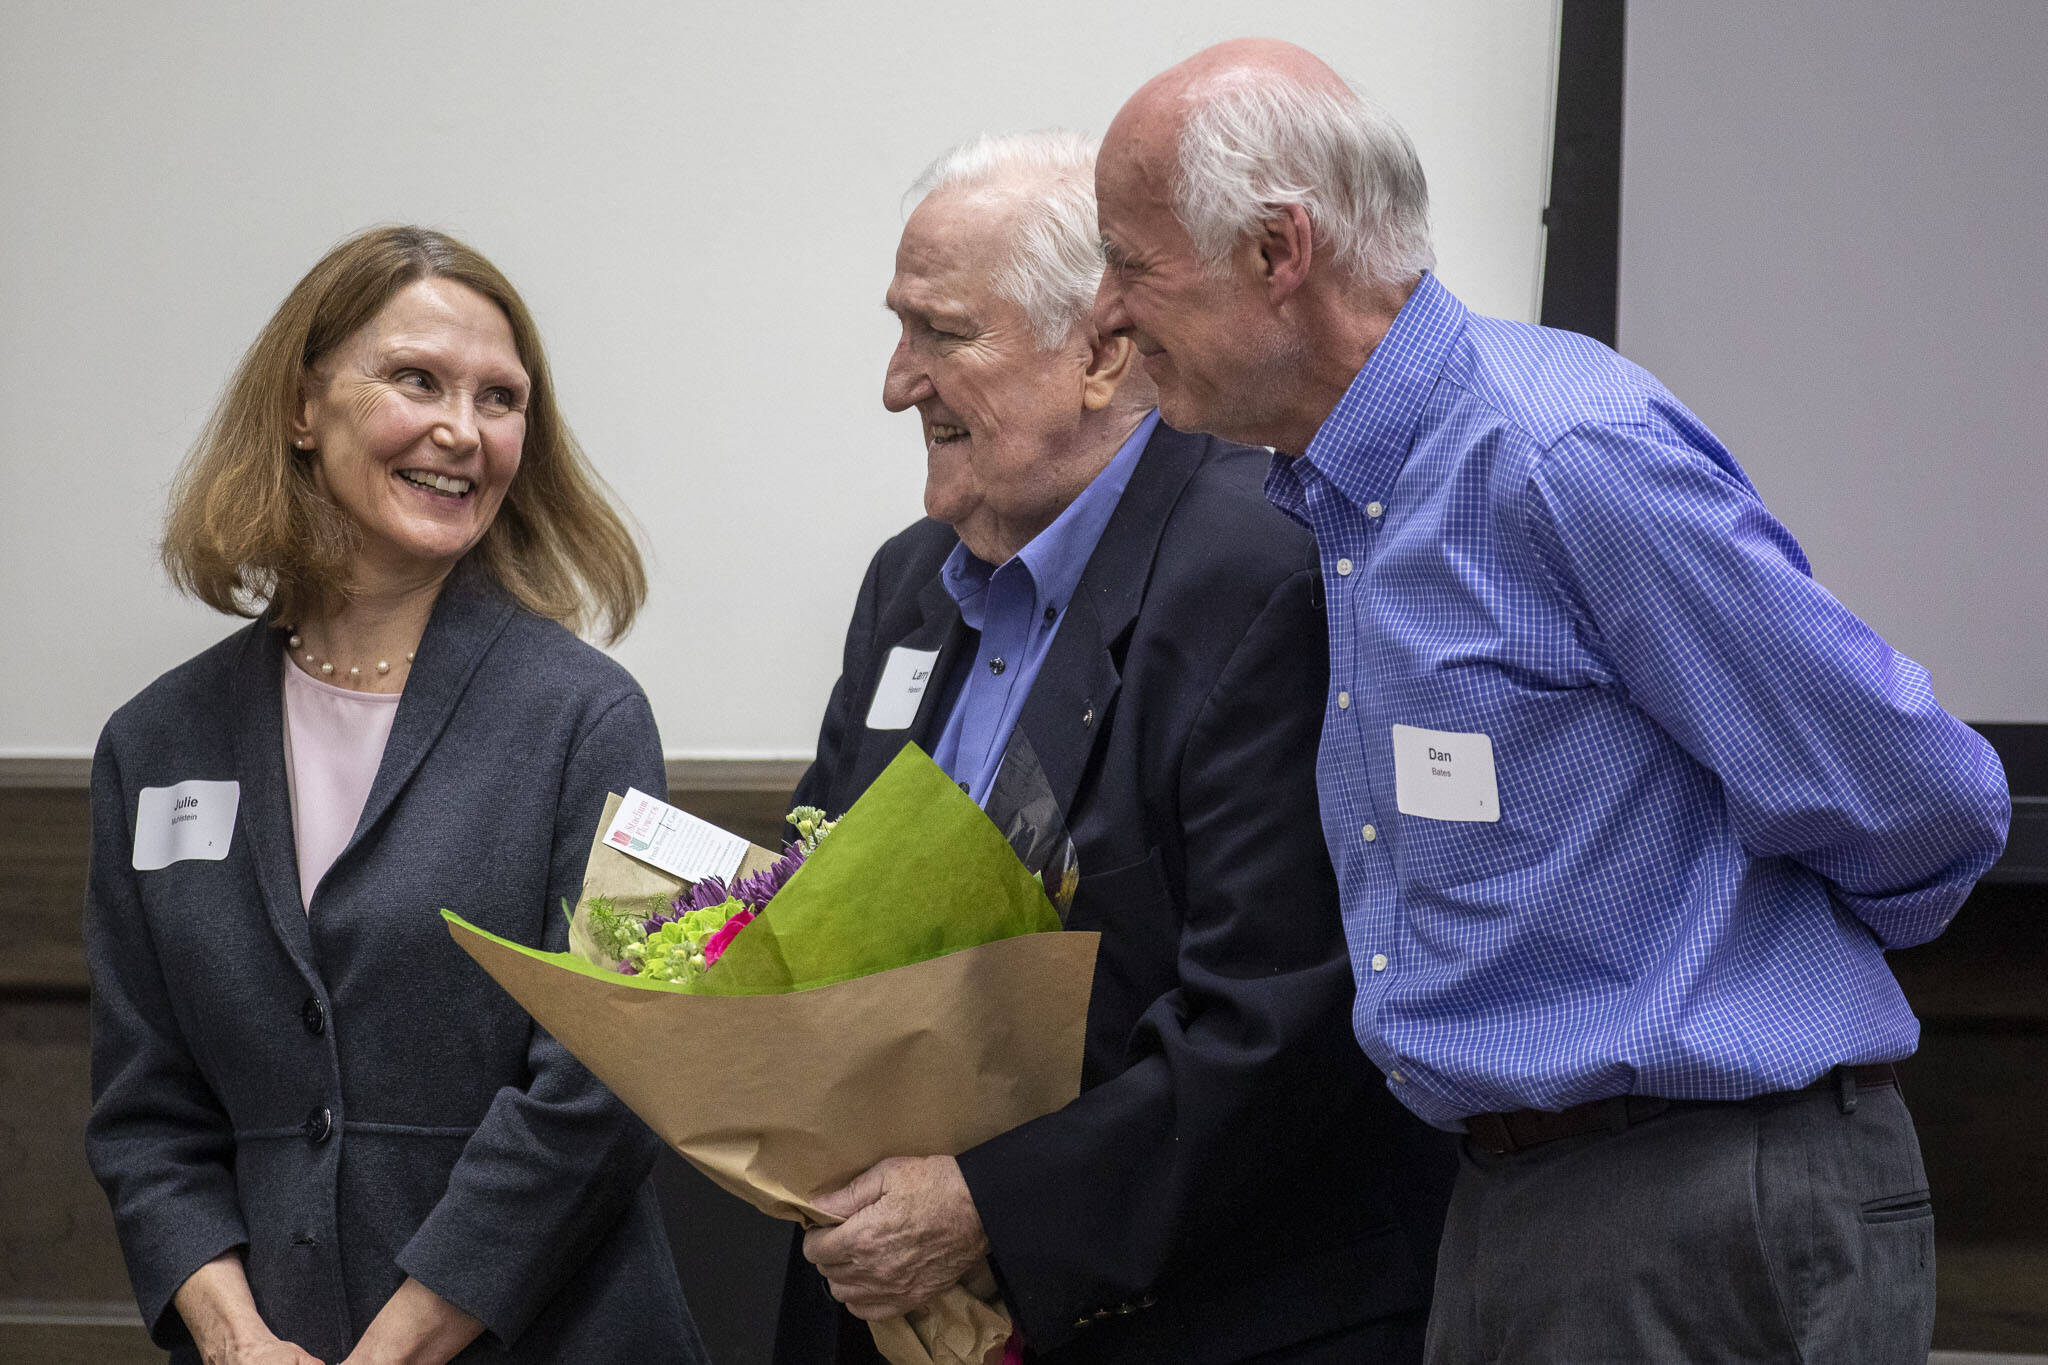 Julie Muhlstein, left, and Dan Bates, right, receive congratulations from Larry Hanson, center, as they are recognized by the Everett Museum of History for their contributions as longtime former Herald journalists at the museum’s annual fundraiser at the Henry M. Jackson Conference Center in Everett, Washington on Sunday, Feb. 26, 2023. (Annie Barker / The Herald)